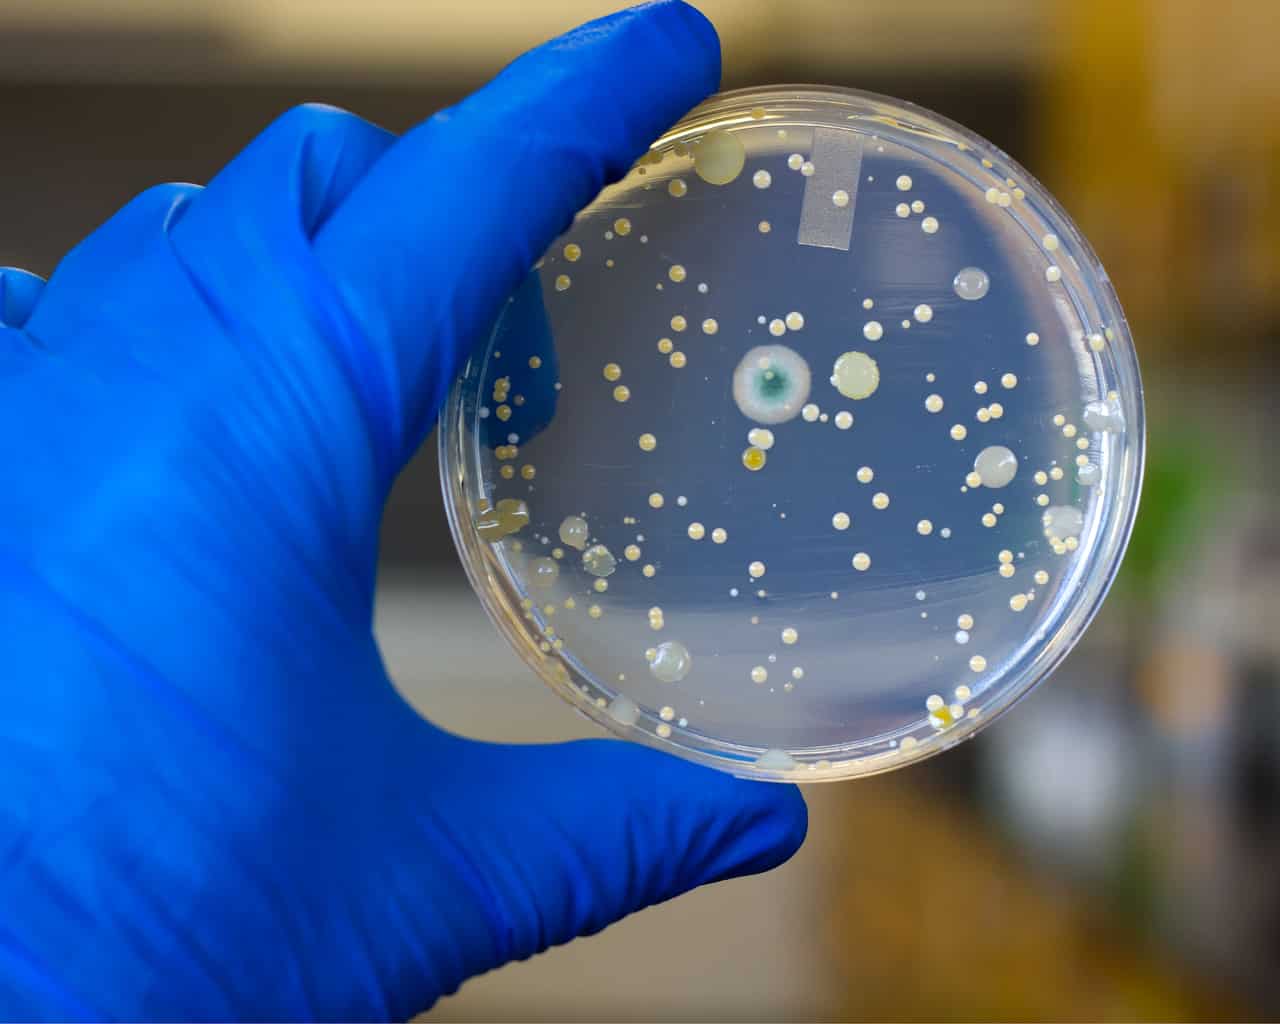 Superbugs: How to tell you’ve been infected